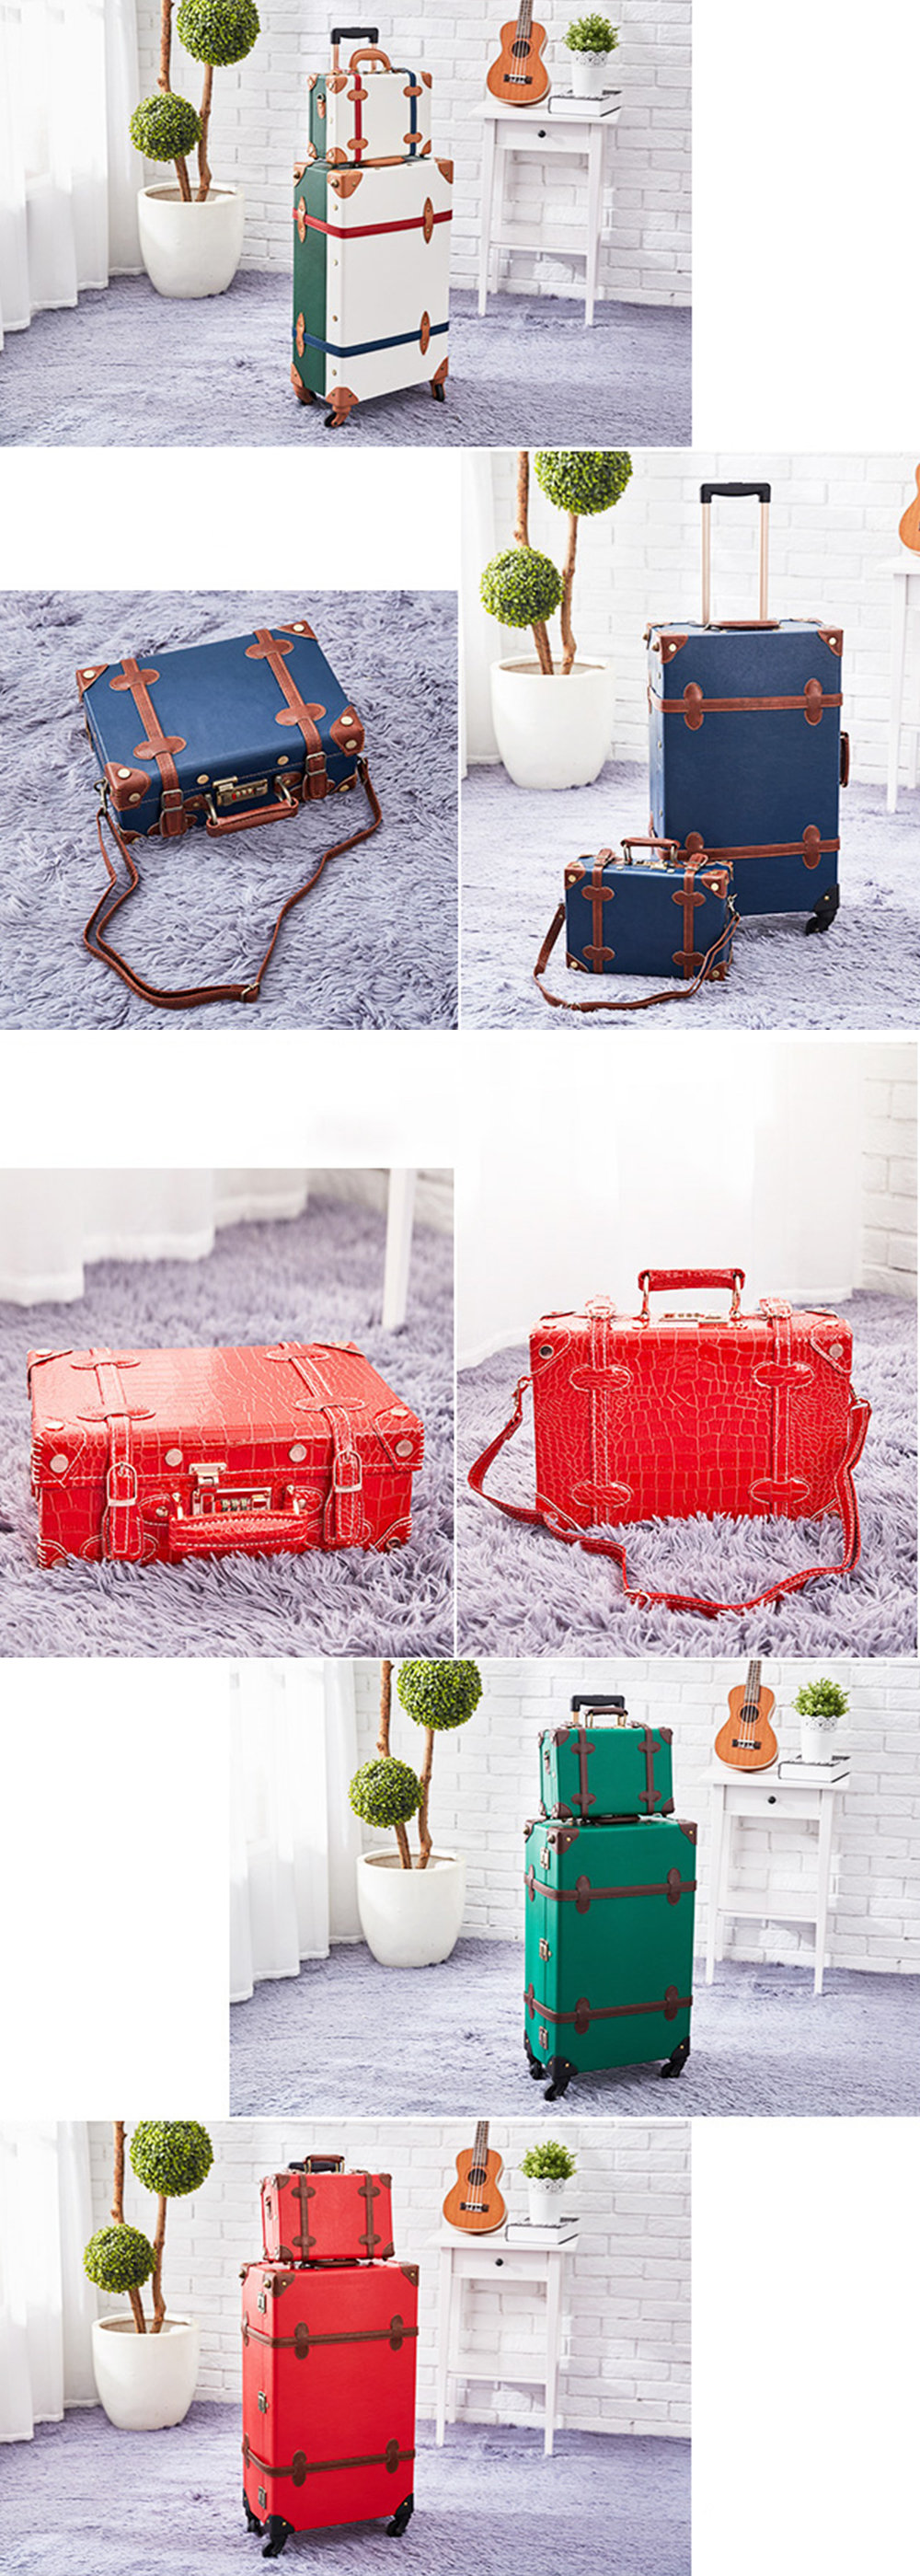 Handcrafted Vintage Suitcase - 2 Sizes - 3 Colors from Apollo Box